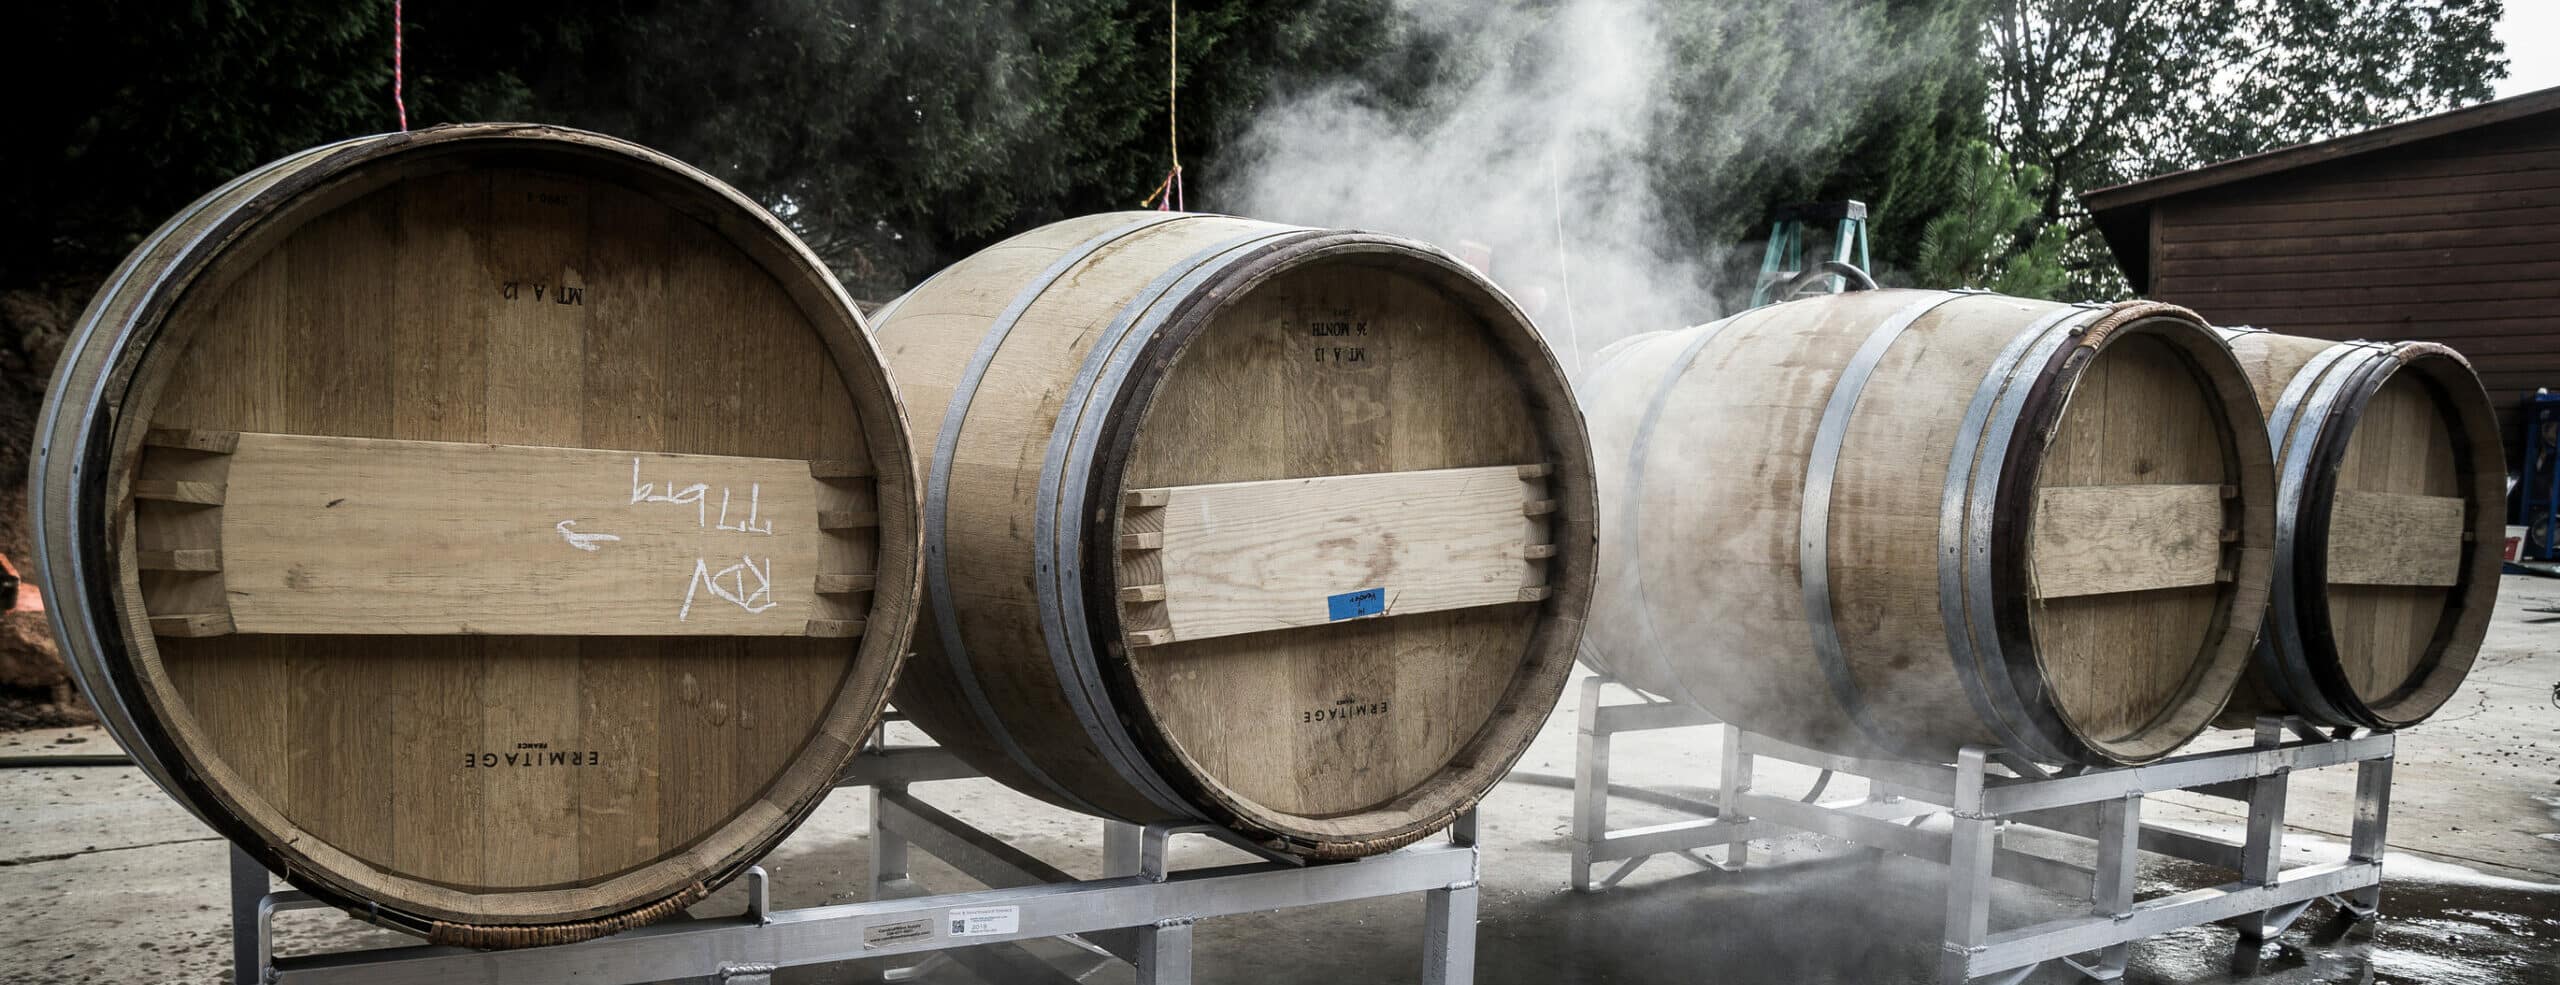 Barrel Sanitation:  All Methods Are Not Created Equal